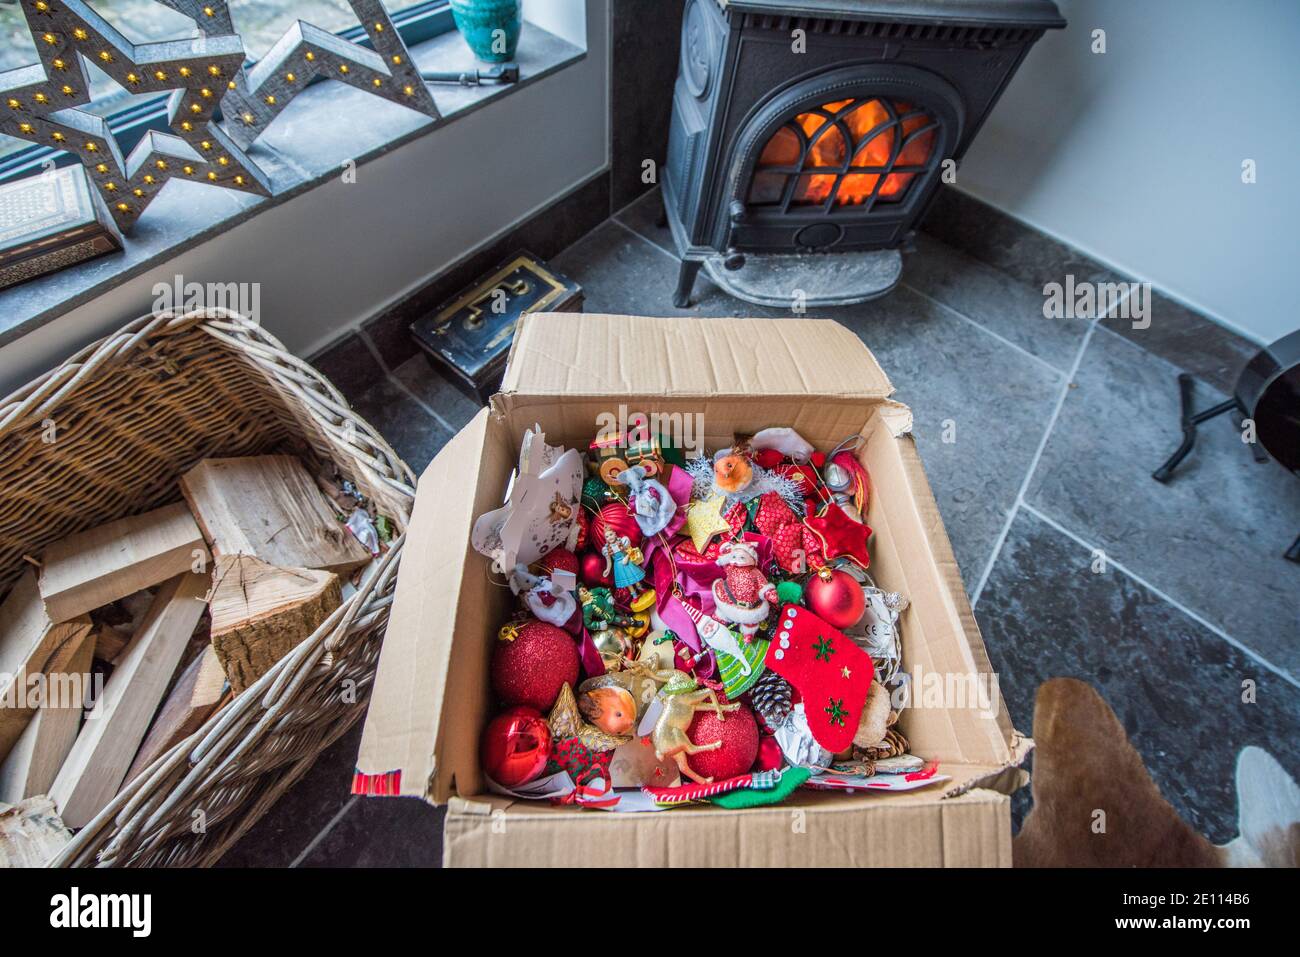 Brown cardboard box with a jumble of family colourful Christmas tree decorations infront of a log burner on a stone floor being packed away Stock Photo